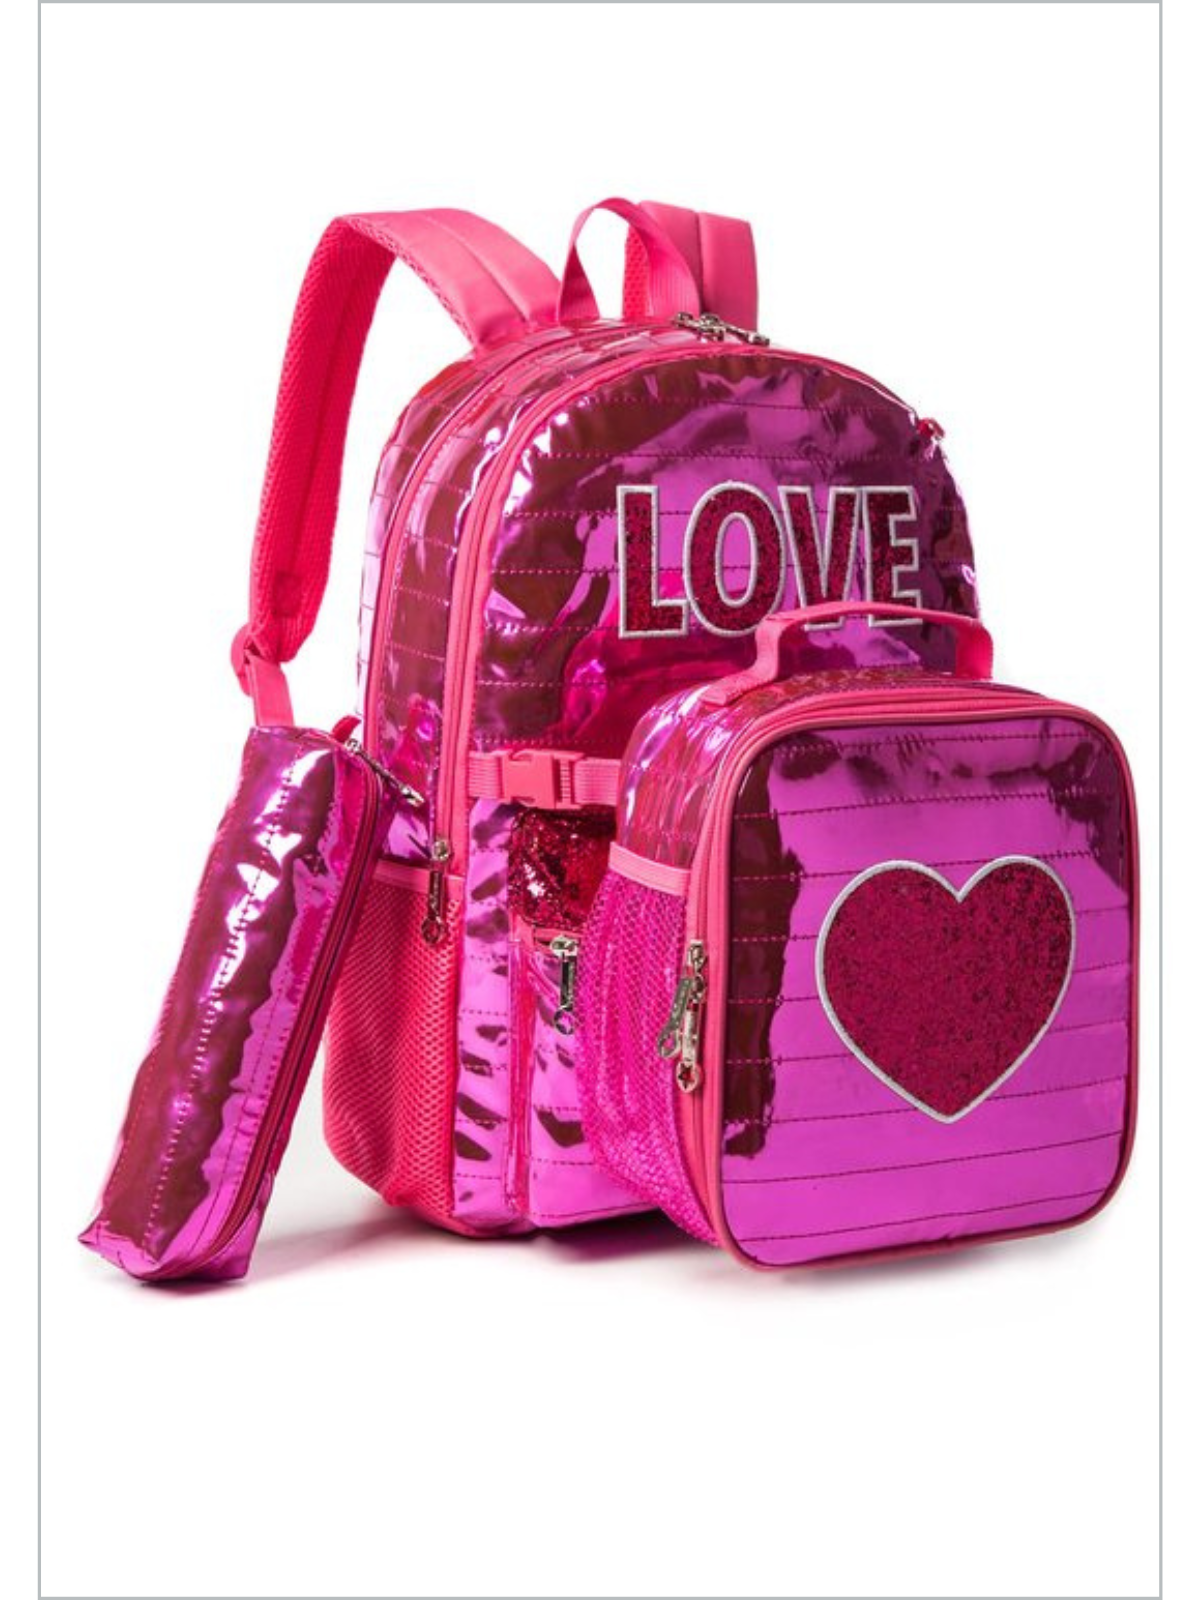 Back To School Accessories | Trendy Backpack Sets | Mia Belle Girls